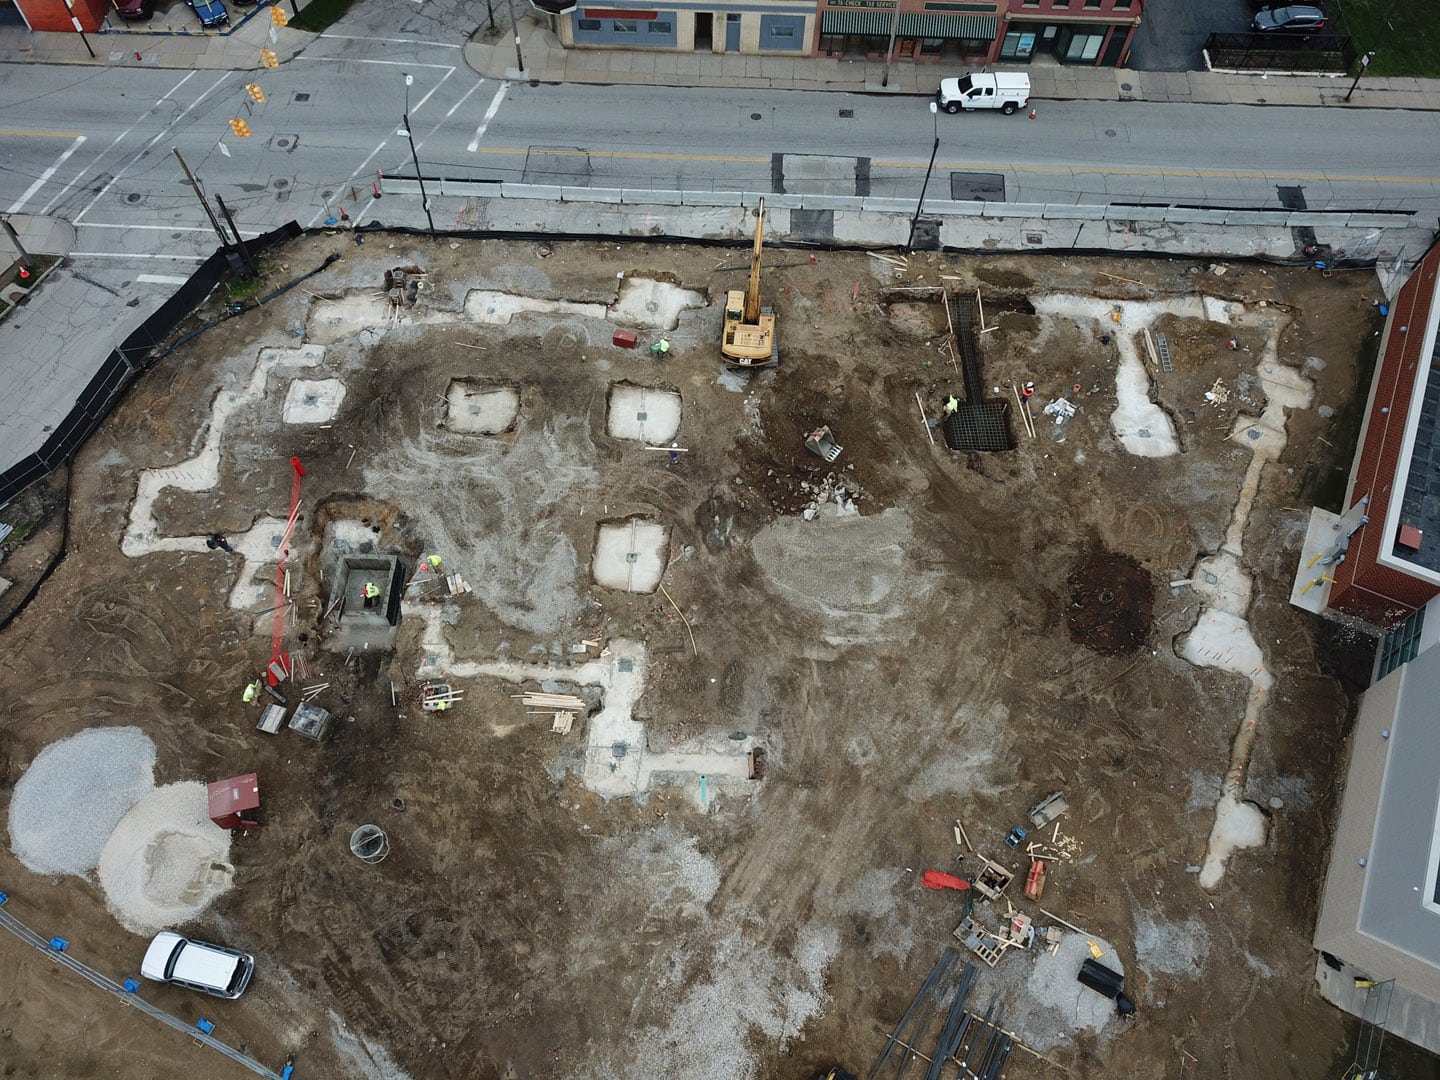 Aerial view of excavator and dirt plot